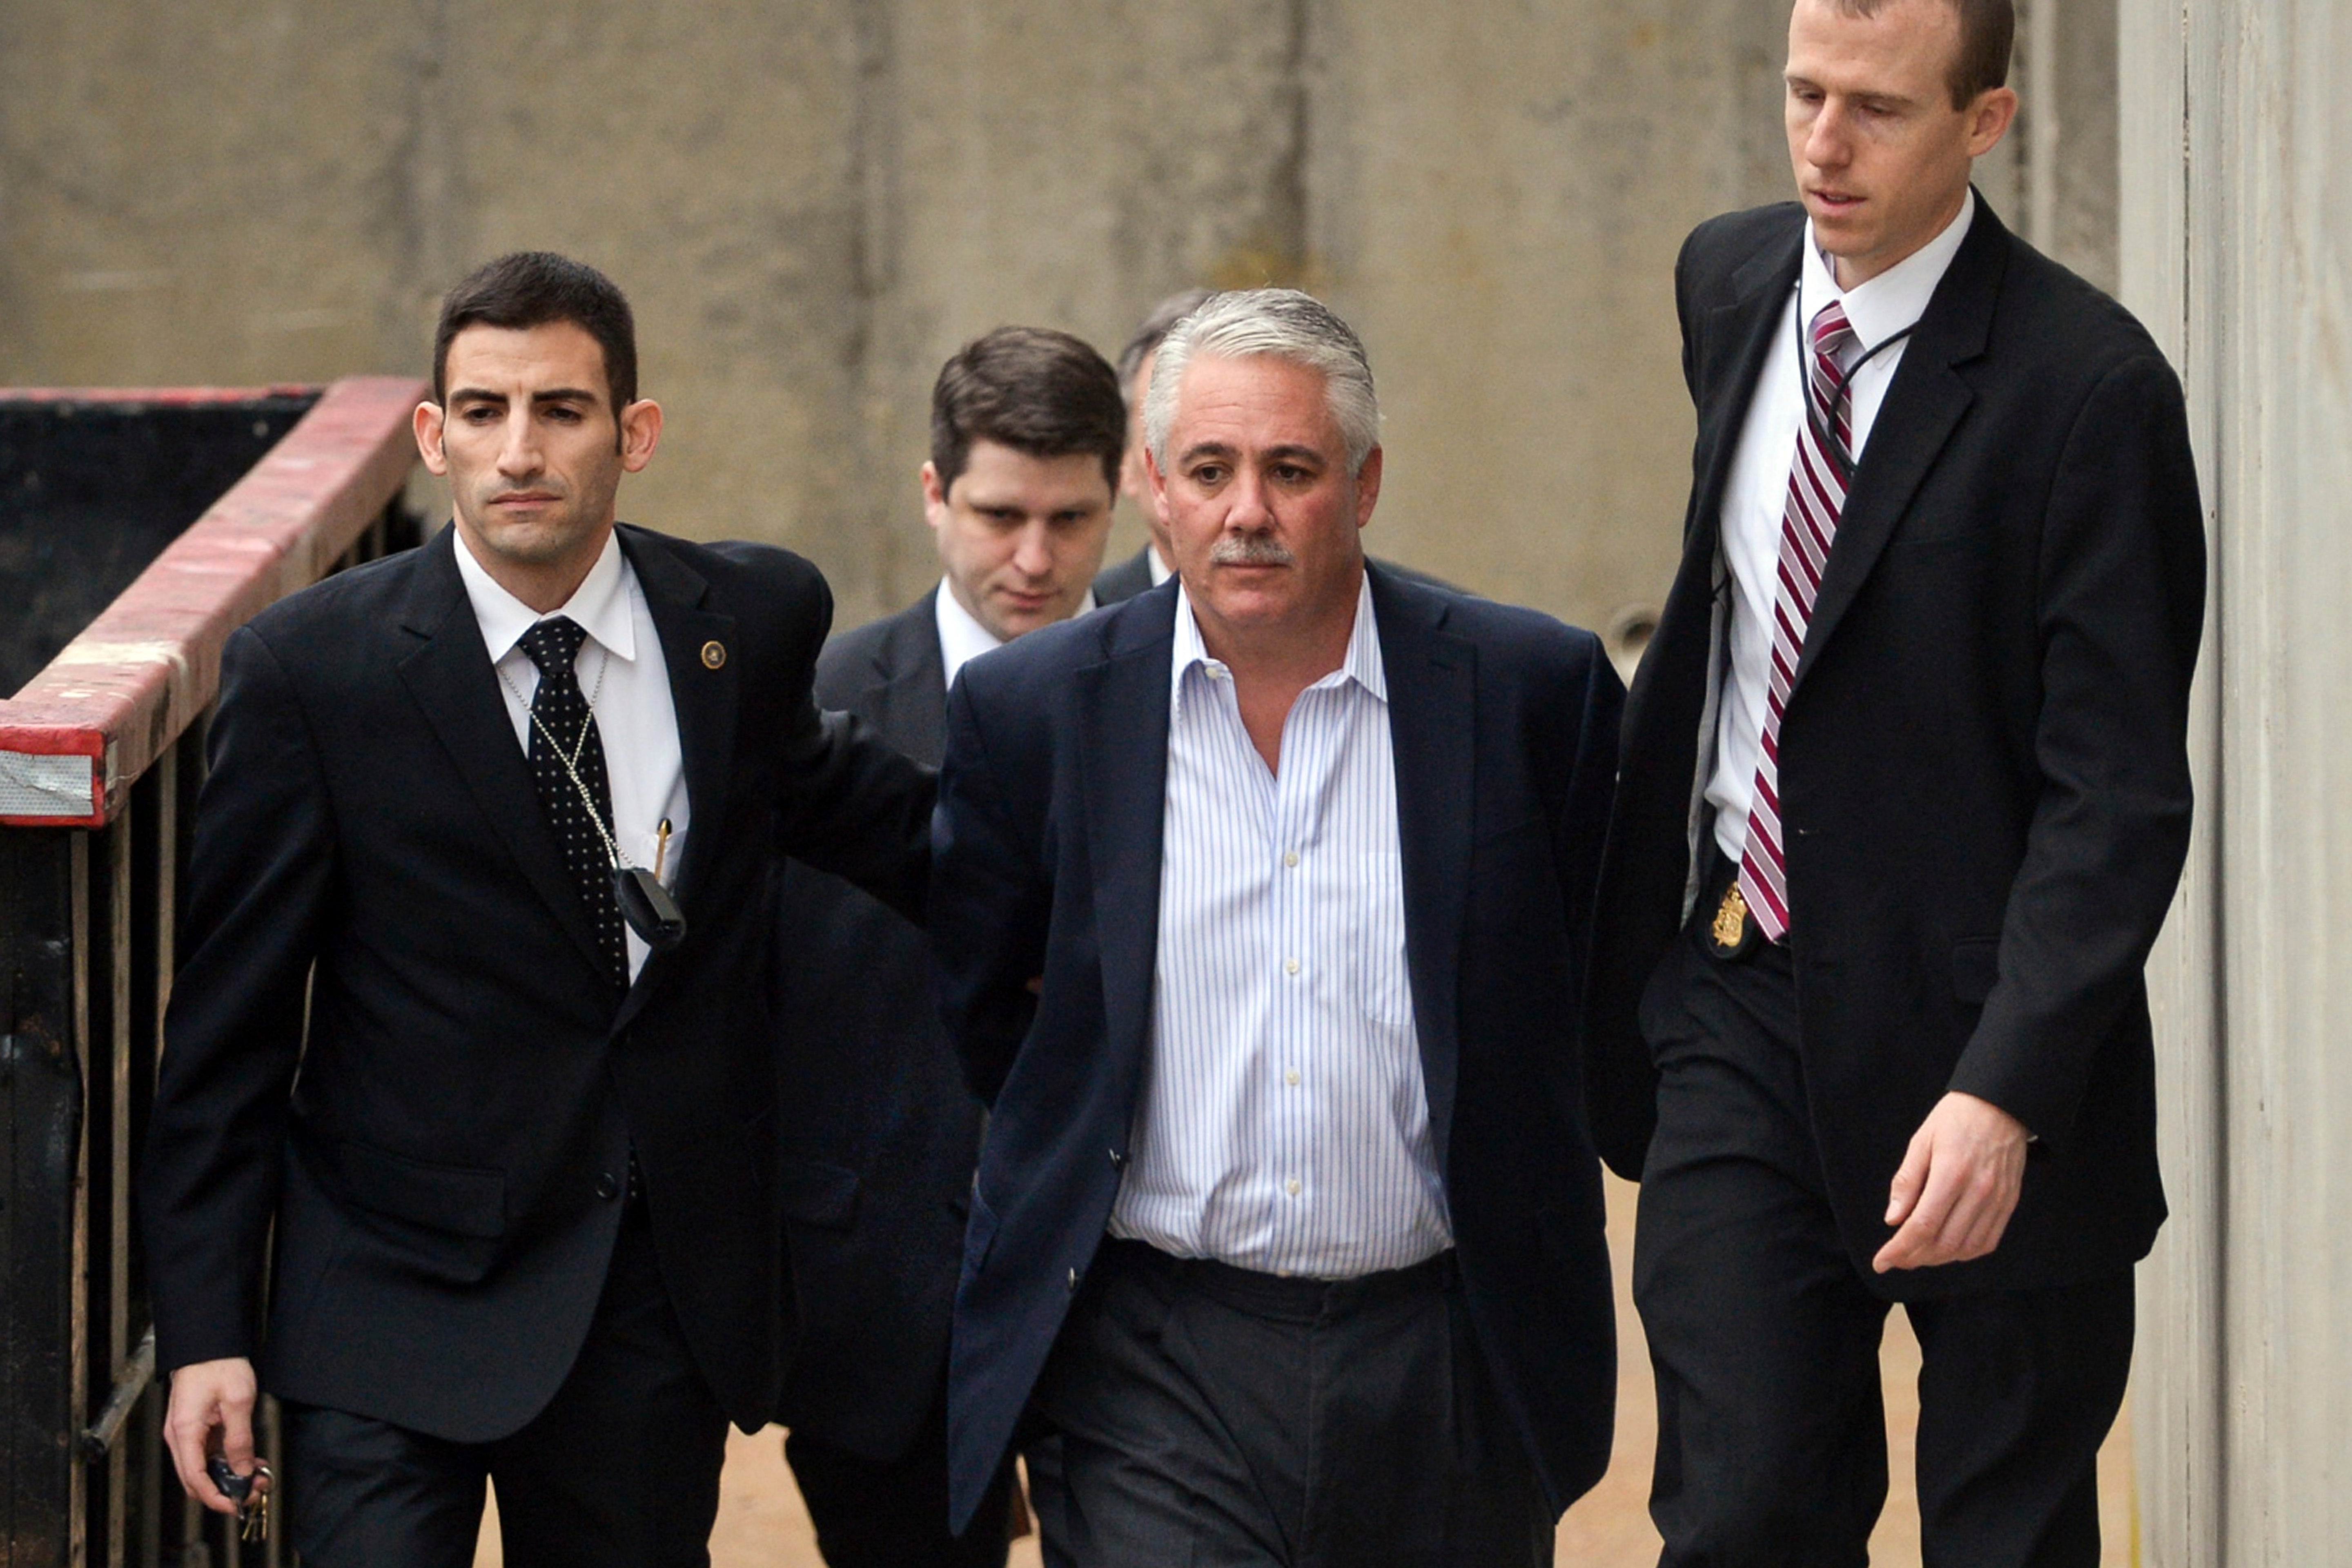 Former Suffolk County Police Chief James Burke, second from right, is escorted to a vehicle by FBI personnel after his arrest in 2015